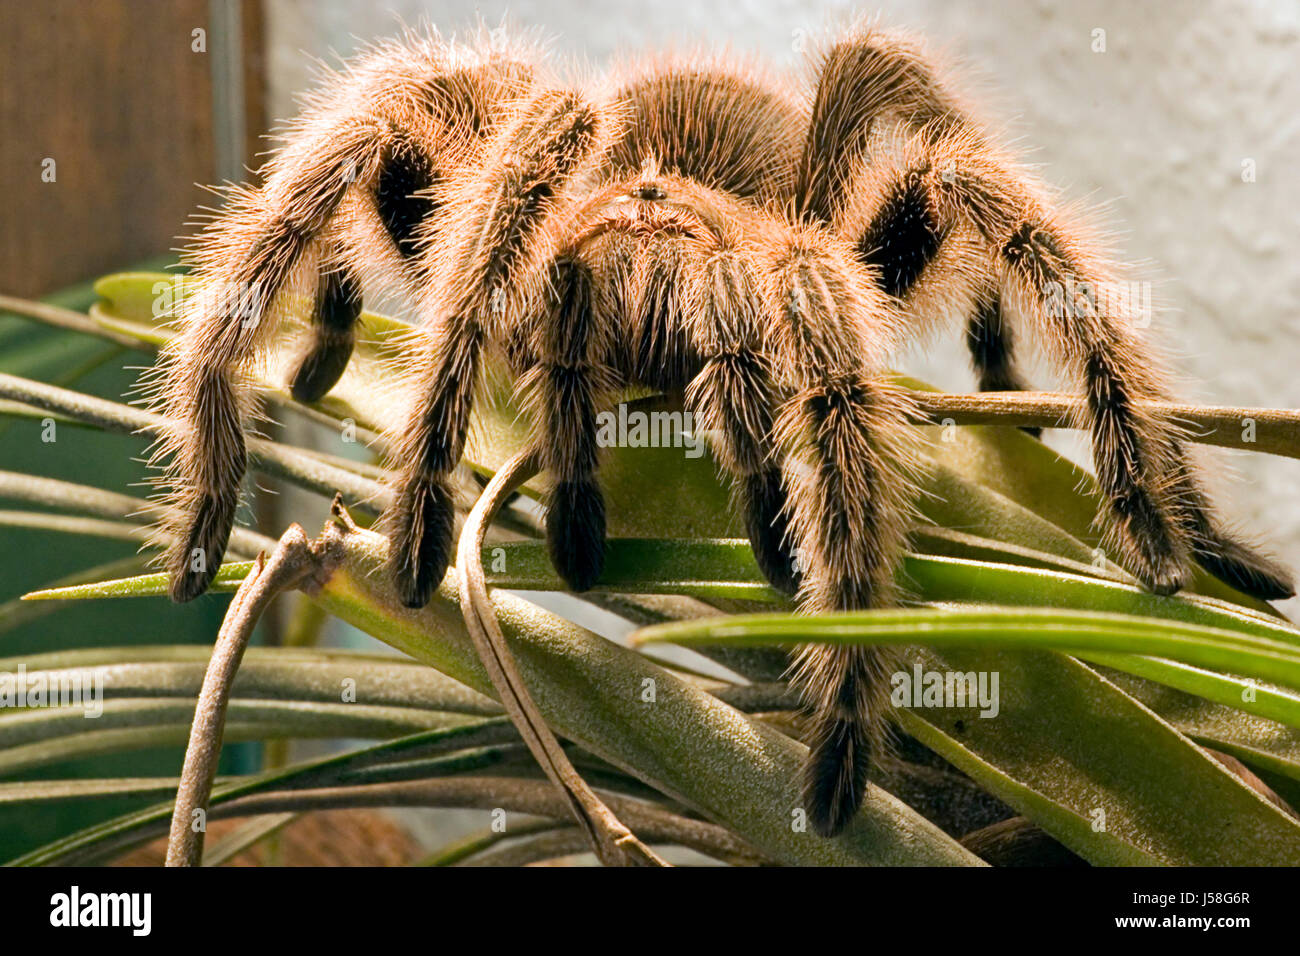 danger pet mangy hairy spider fear chile terrarium poison spinelessly red Stock Photo